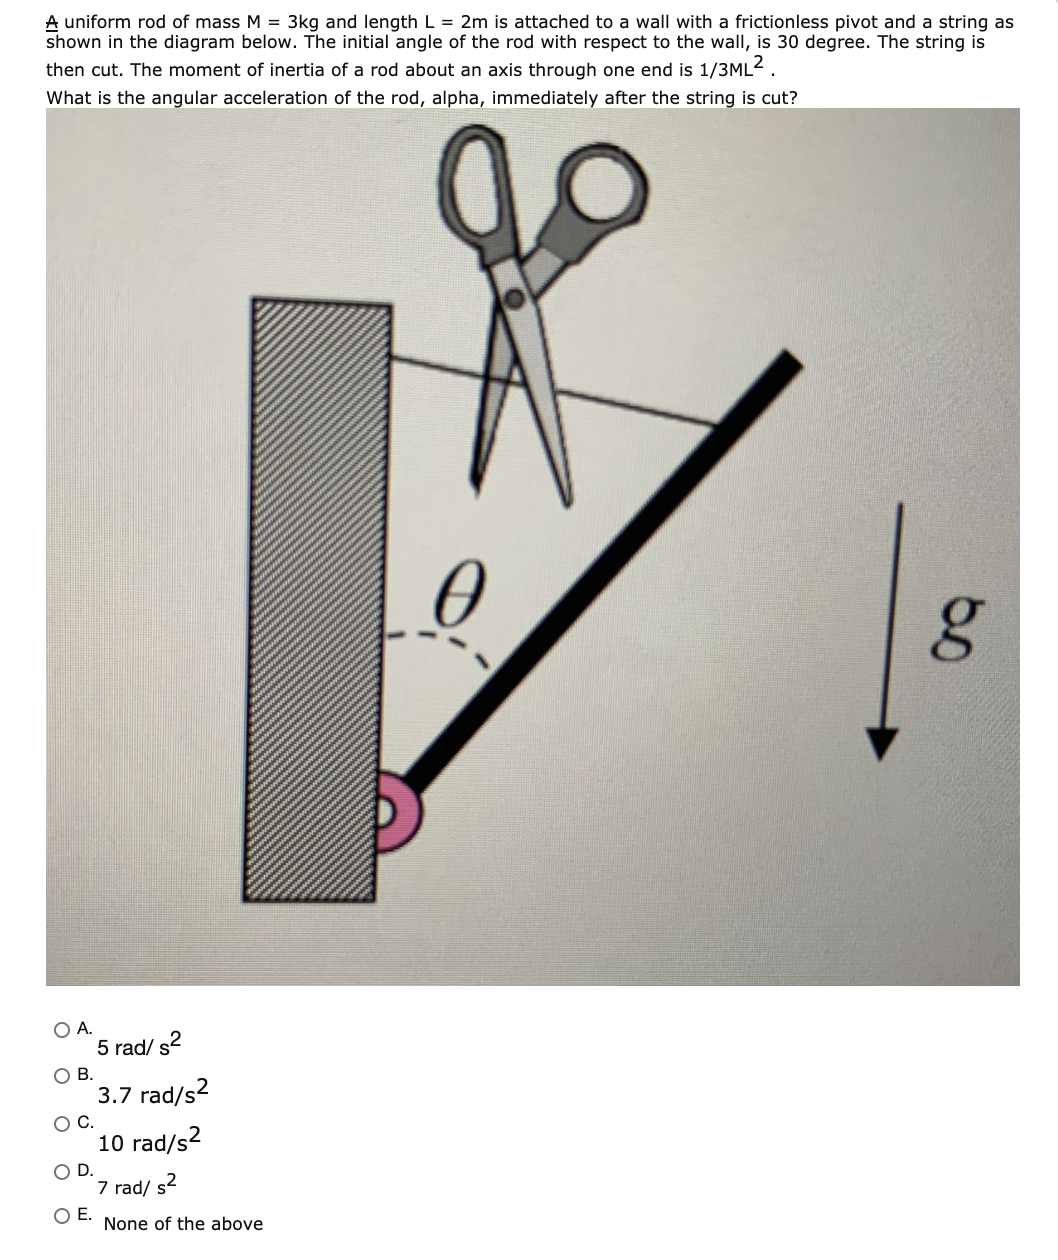 A uniform rod of mass M = 3kg and length L = 2m is attached to a wall with a frictionless pivot and a string as
shown in the diagram below. The initial angle of the rod with respect to the wall, is 30 degree. The string is
then cut. The moment of inertia of a rod about an axis through one end is 1/3ML2.
What is the angular acceleration of the rod, alpha, immediately after the string is cut?
OA.
5 rad/ s2
O B.
3.7 rad/s?
OC.
10 rad/s2
OD.
7 rad/ s2
OE.
None of the above
